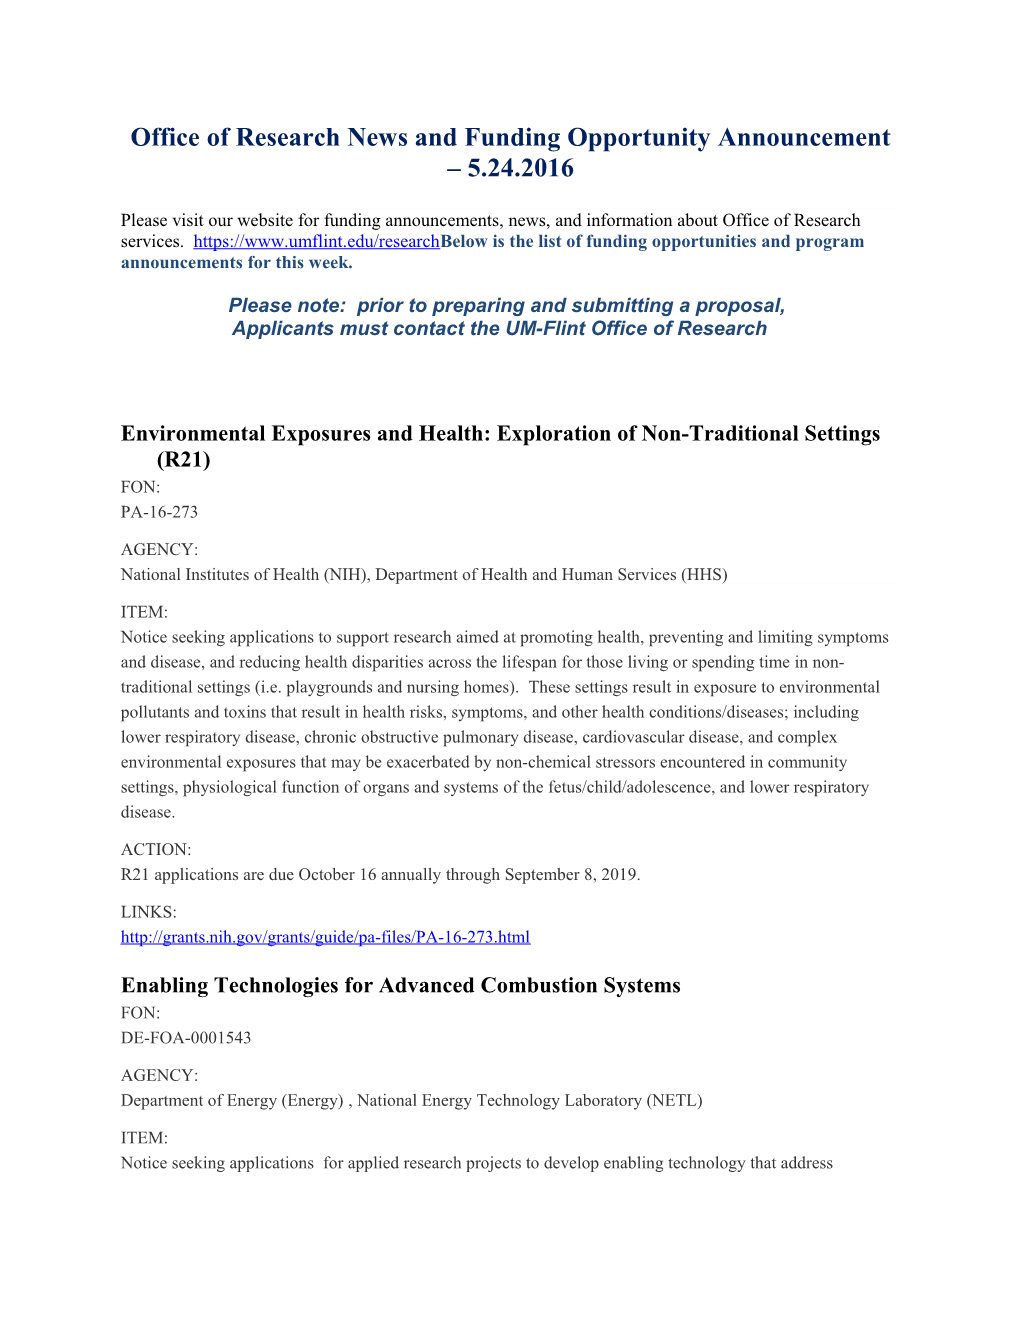 Office of Research News and Funding Opportunity Announcement 5.24.2016